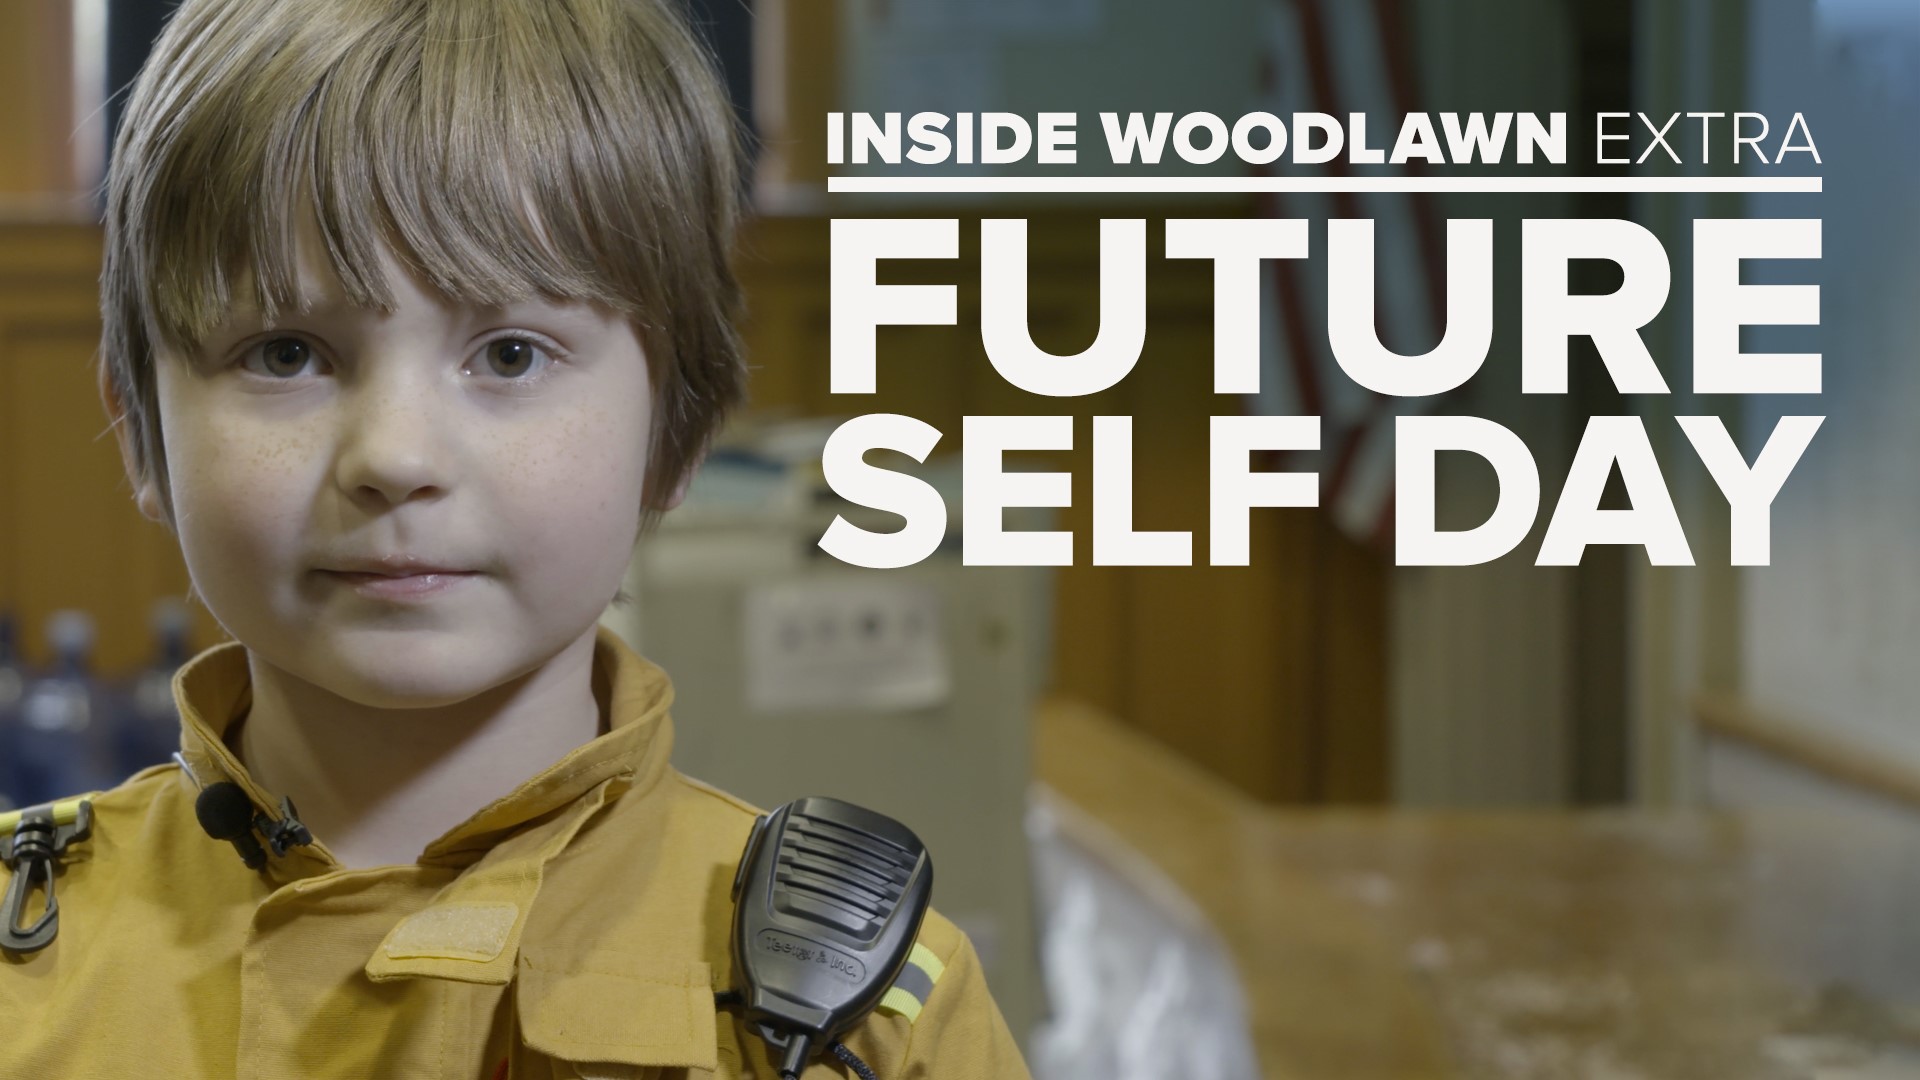 Students from Woodlawn elementary school had the opportunity to dress like their “future self” during spirit week.